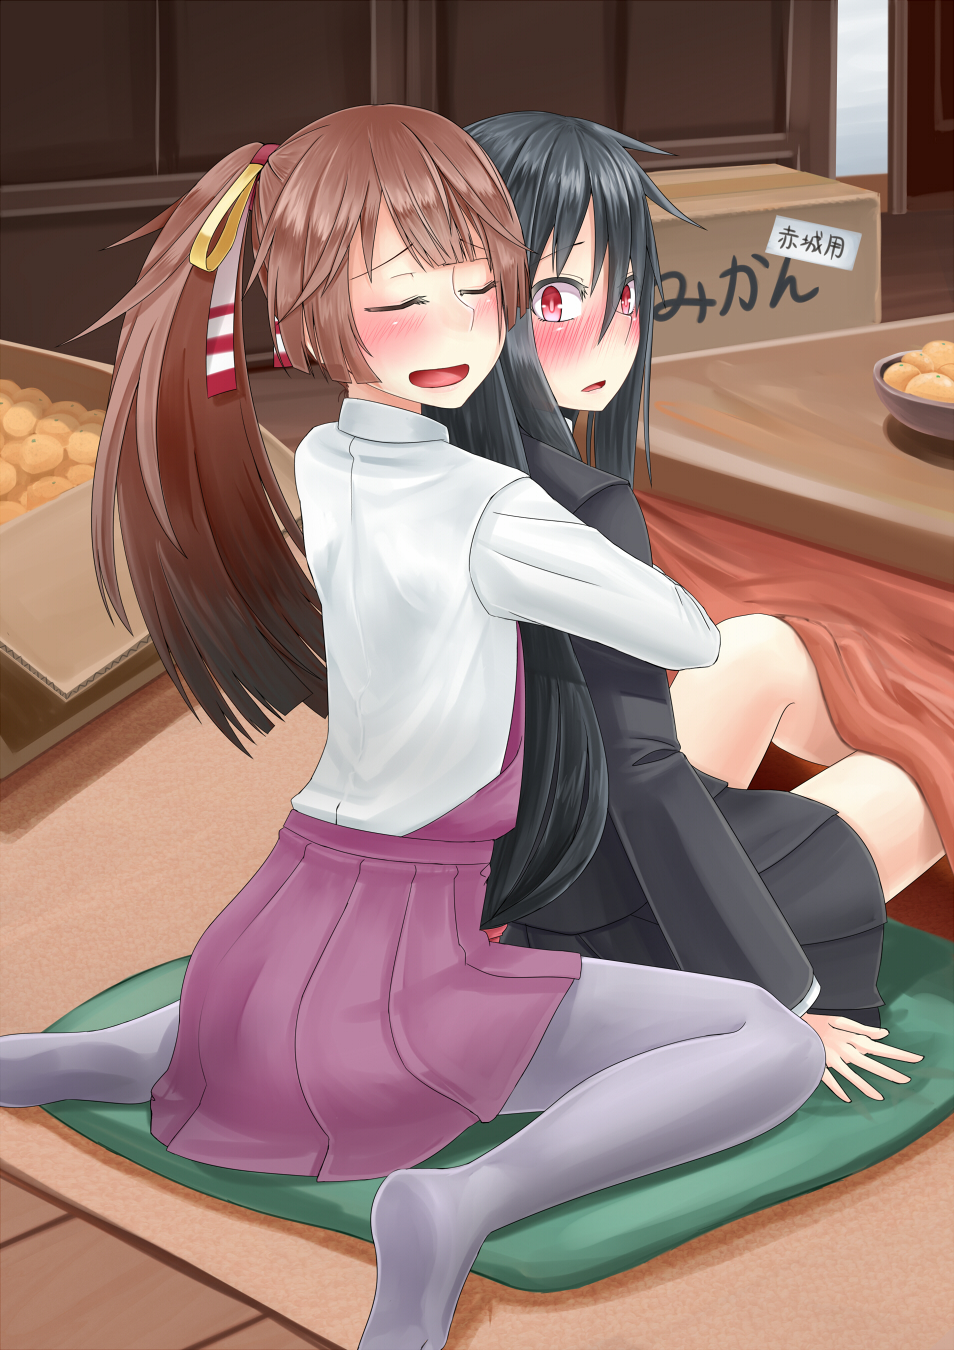 2girls black_hair blush bowl box brown_hair closed_eyes commentary_request food fruit hatsushimo_(kantai_collection) highres hug hug_from_behind kantai_collection kazagumo_(kantai_collection) kotatsu mandarin_orange multiple_girls open_mouth pillow ponytail red_eyes sitting skirt smile table translation_request yuri zaki_(2872849)